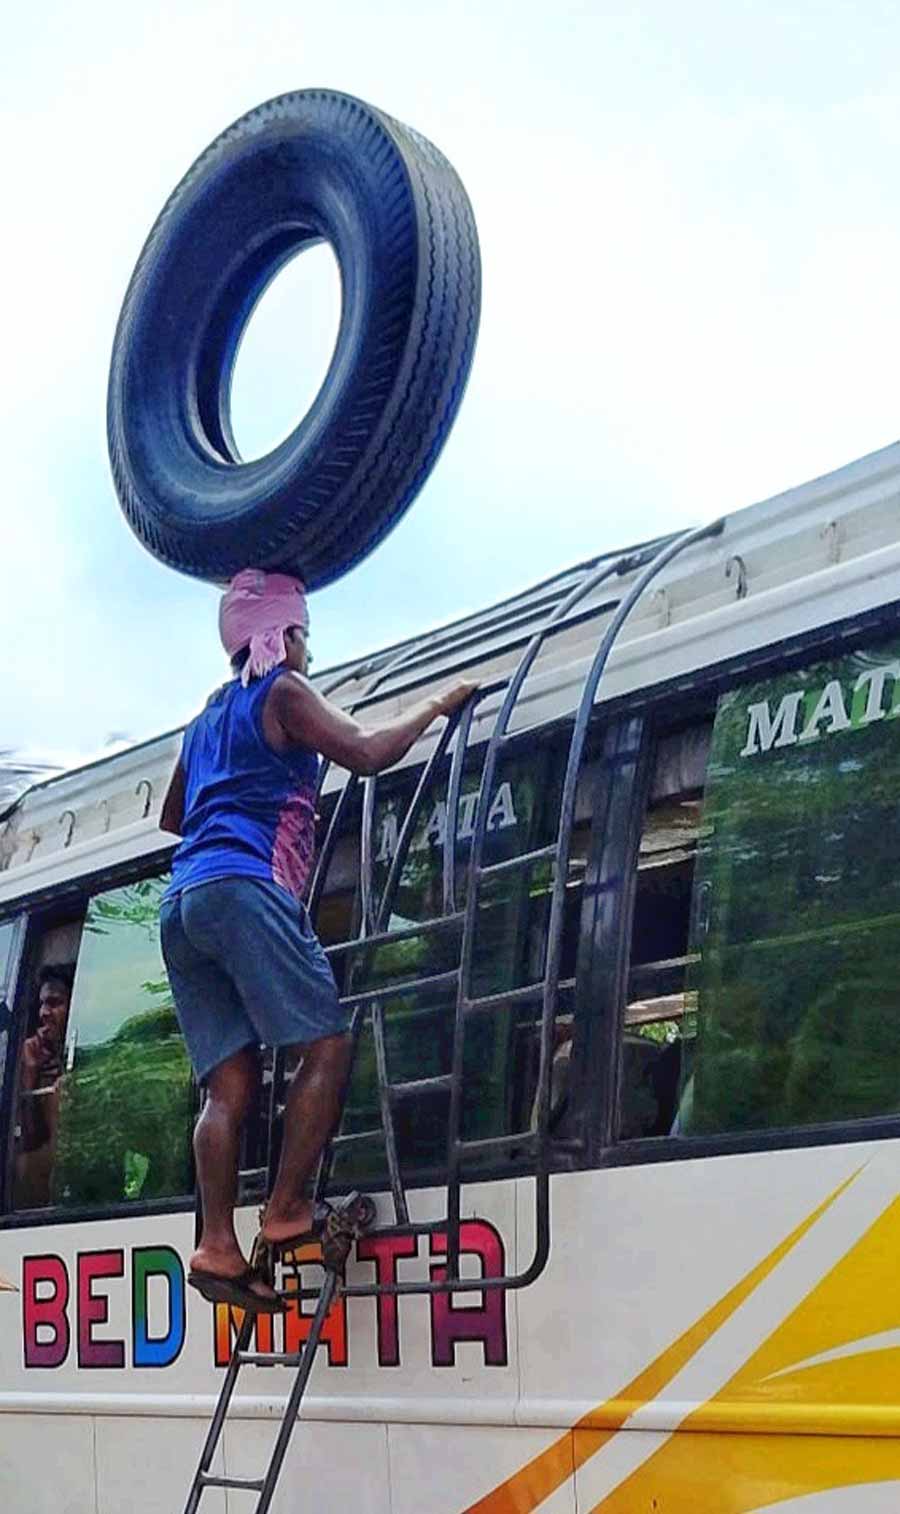 A labourer balances a heavy-duty tyre on his head as he climbs a ladder to reach the roof of a bus 